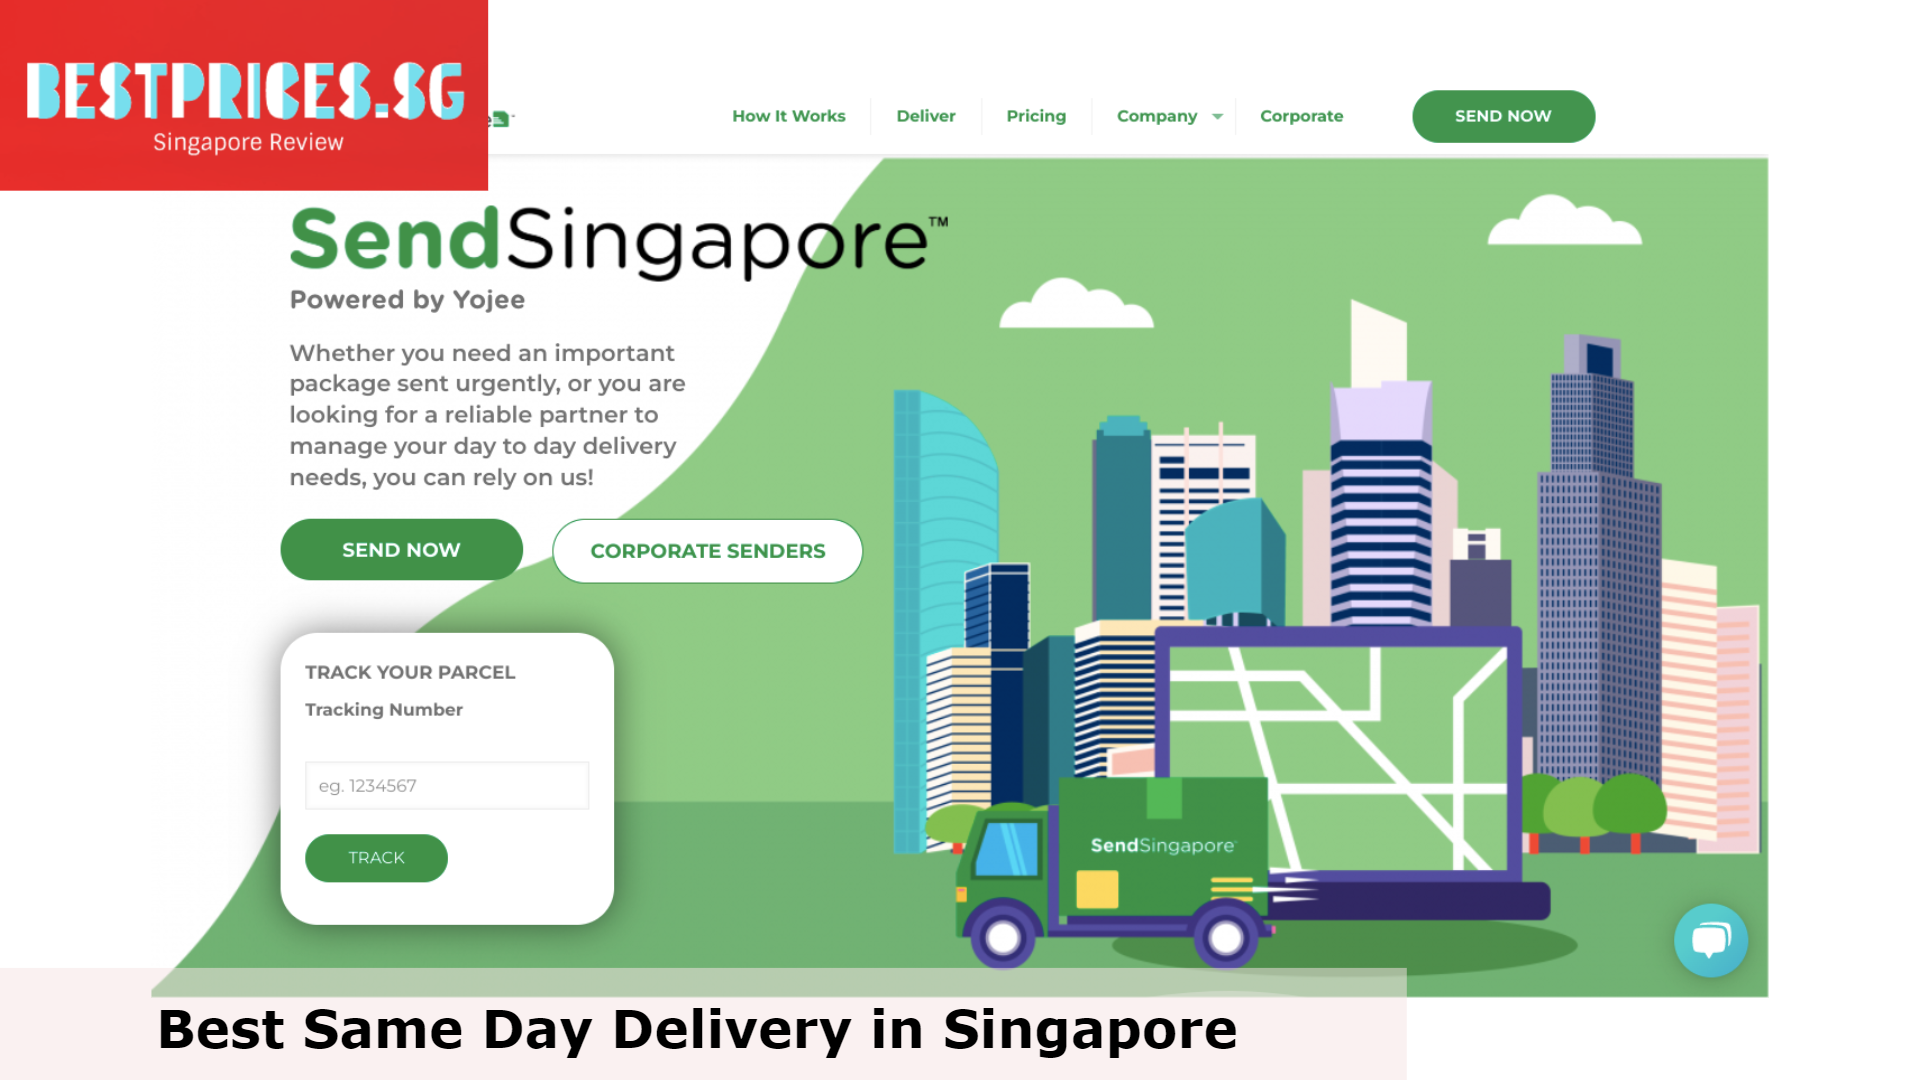 Send Singapore - Best Same Day Delivery in Singapore, Same Day Delivery Singapore, Express Delivery in 1 hour, Same Day Delivery Courier Options In Singapore, Same-Day Delivery Gifts In Singapore, Best Courier Services in Singapore, Which delivery app is the cheapest Singapore?, Which courier service has lowest fees?, cheapest same day delivery singapore, same day delivery singapore gifts, same day delivery online shopping singapore, same day delivery singapore food, birthday gift same day delivery singapore, door to door delivery singapore, same day delivery singapore cake, same day delivery singapore flowers, 